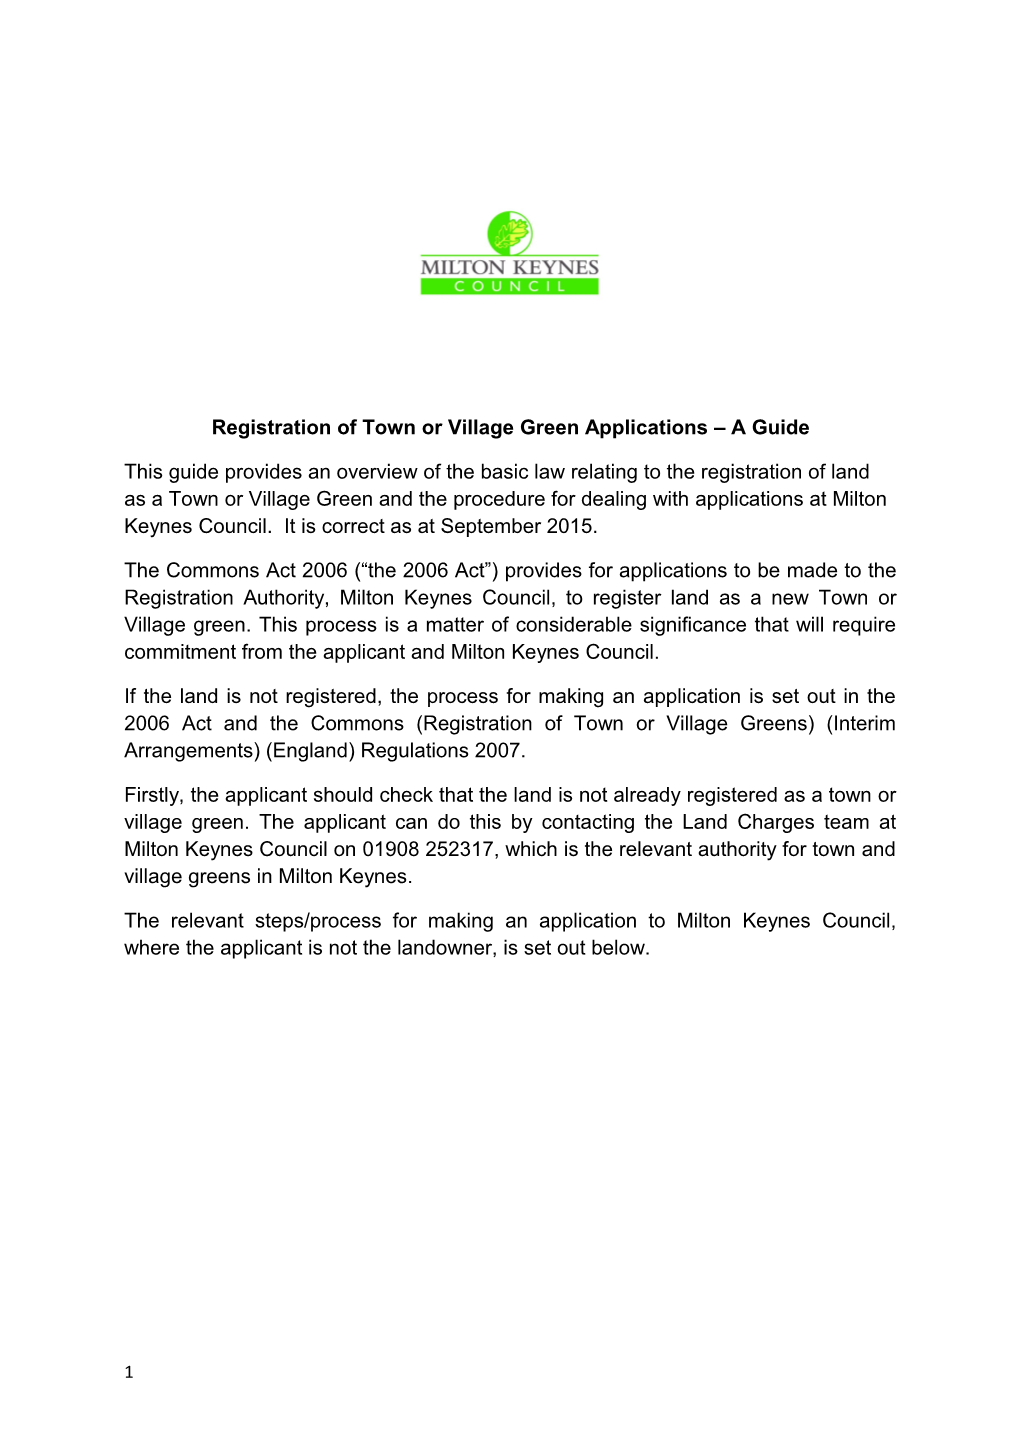 Registration of Town Or Village Green Applications a Guide